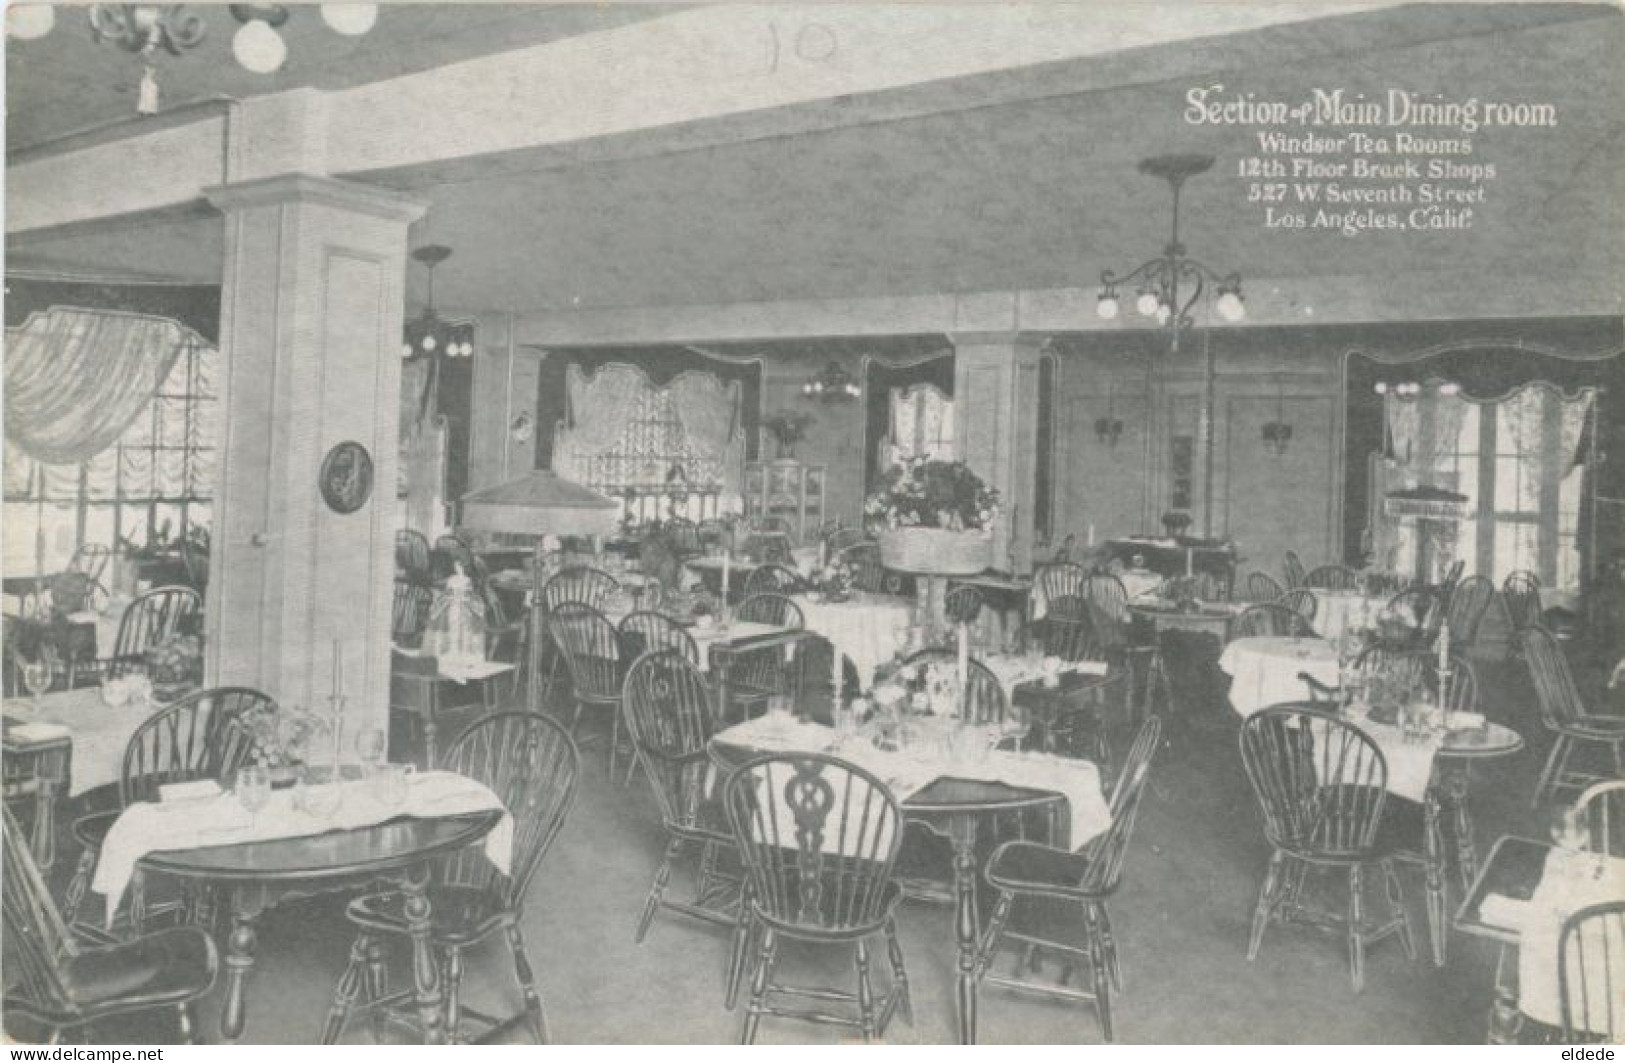 Section And Main Dining Room Windsor Tea Rooms Los Angeles - Los Angeles